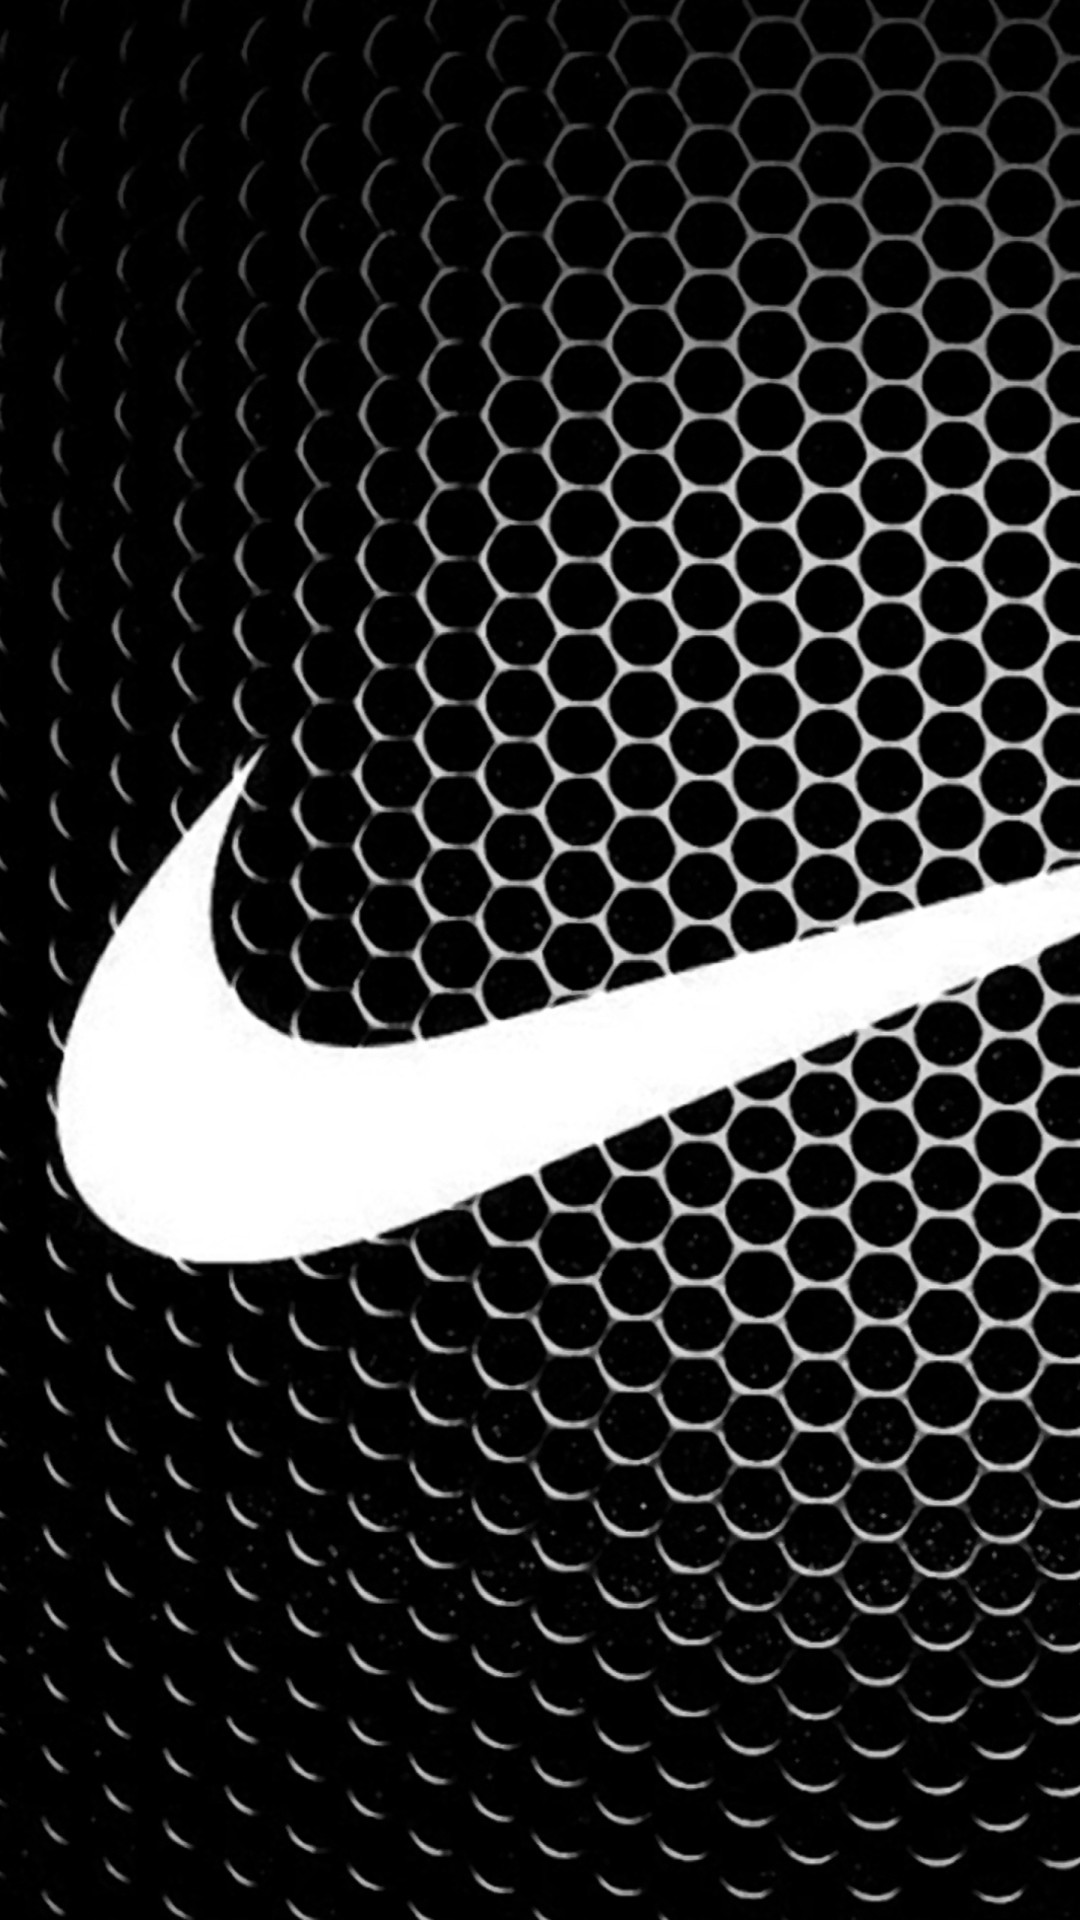 Best Nike iPhone Wallpapers - Top Free Best Nike iPhone Backgrounds -  WallpaperAccess